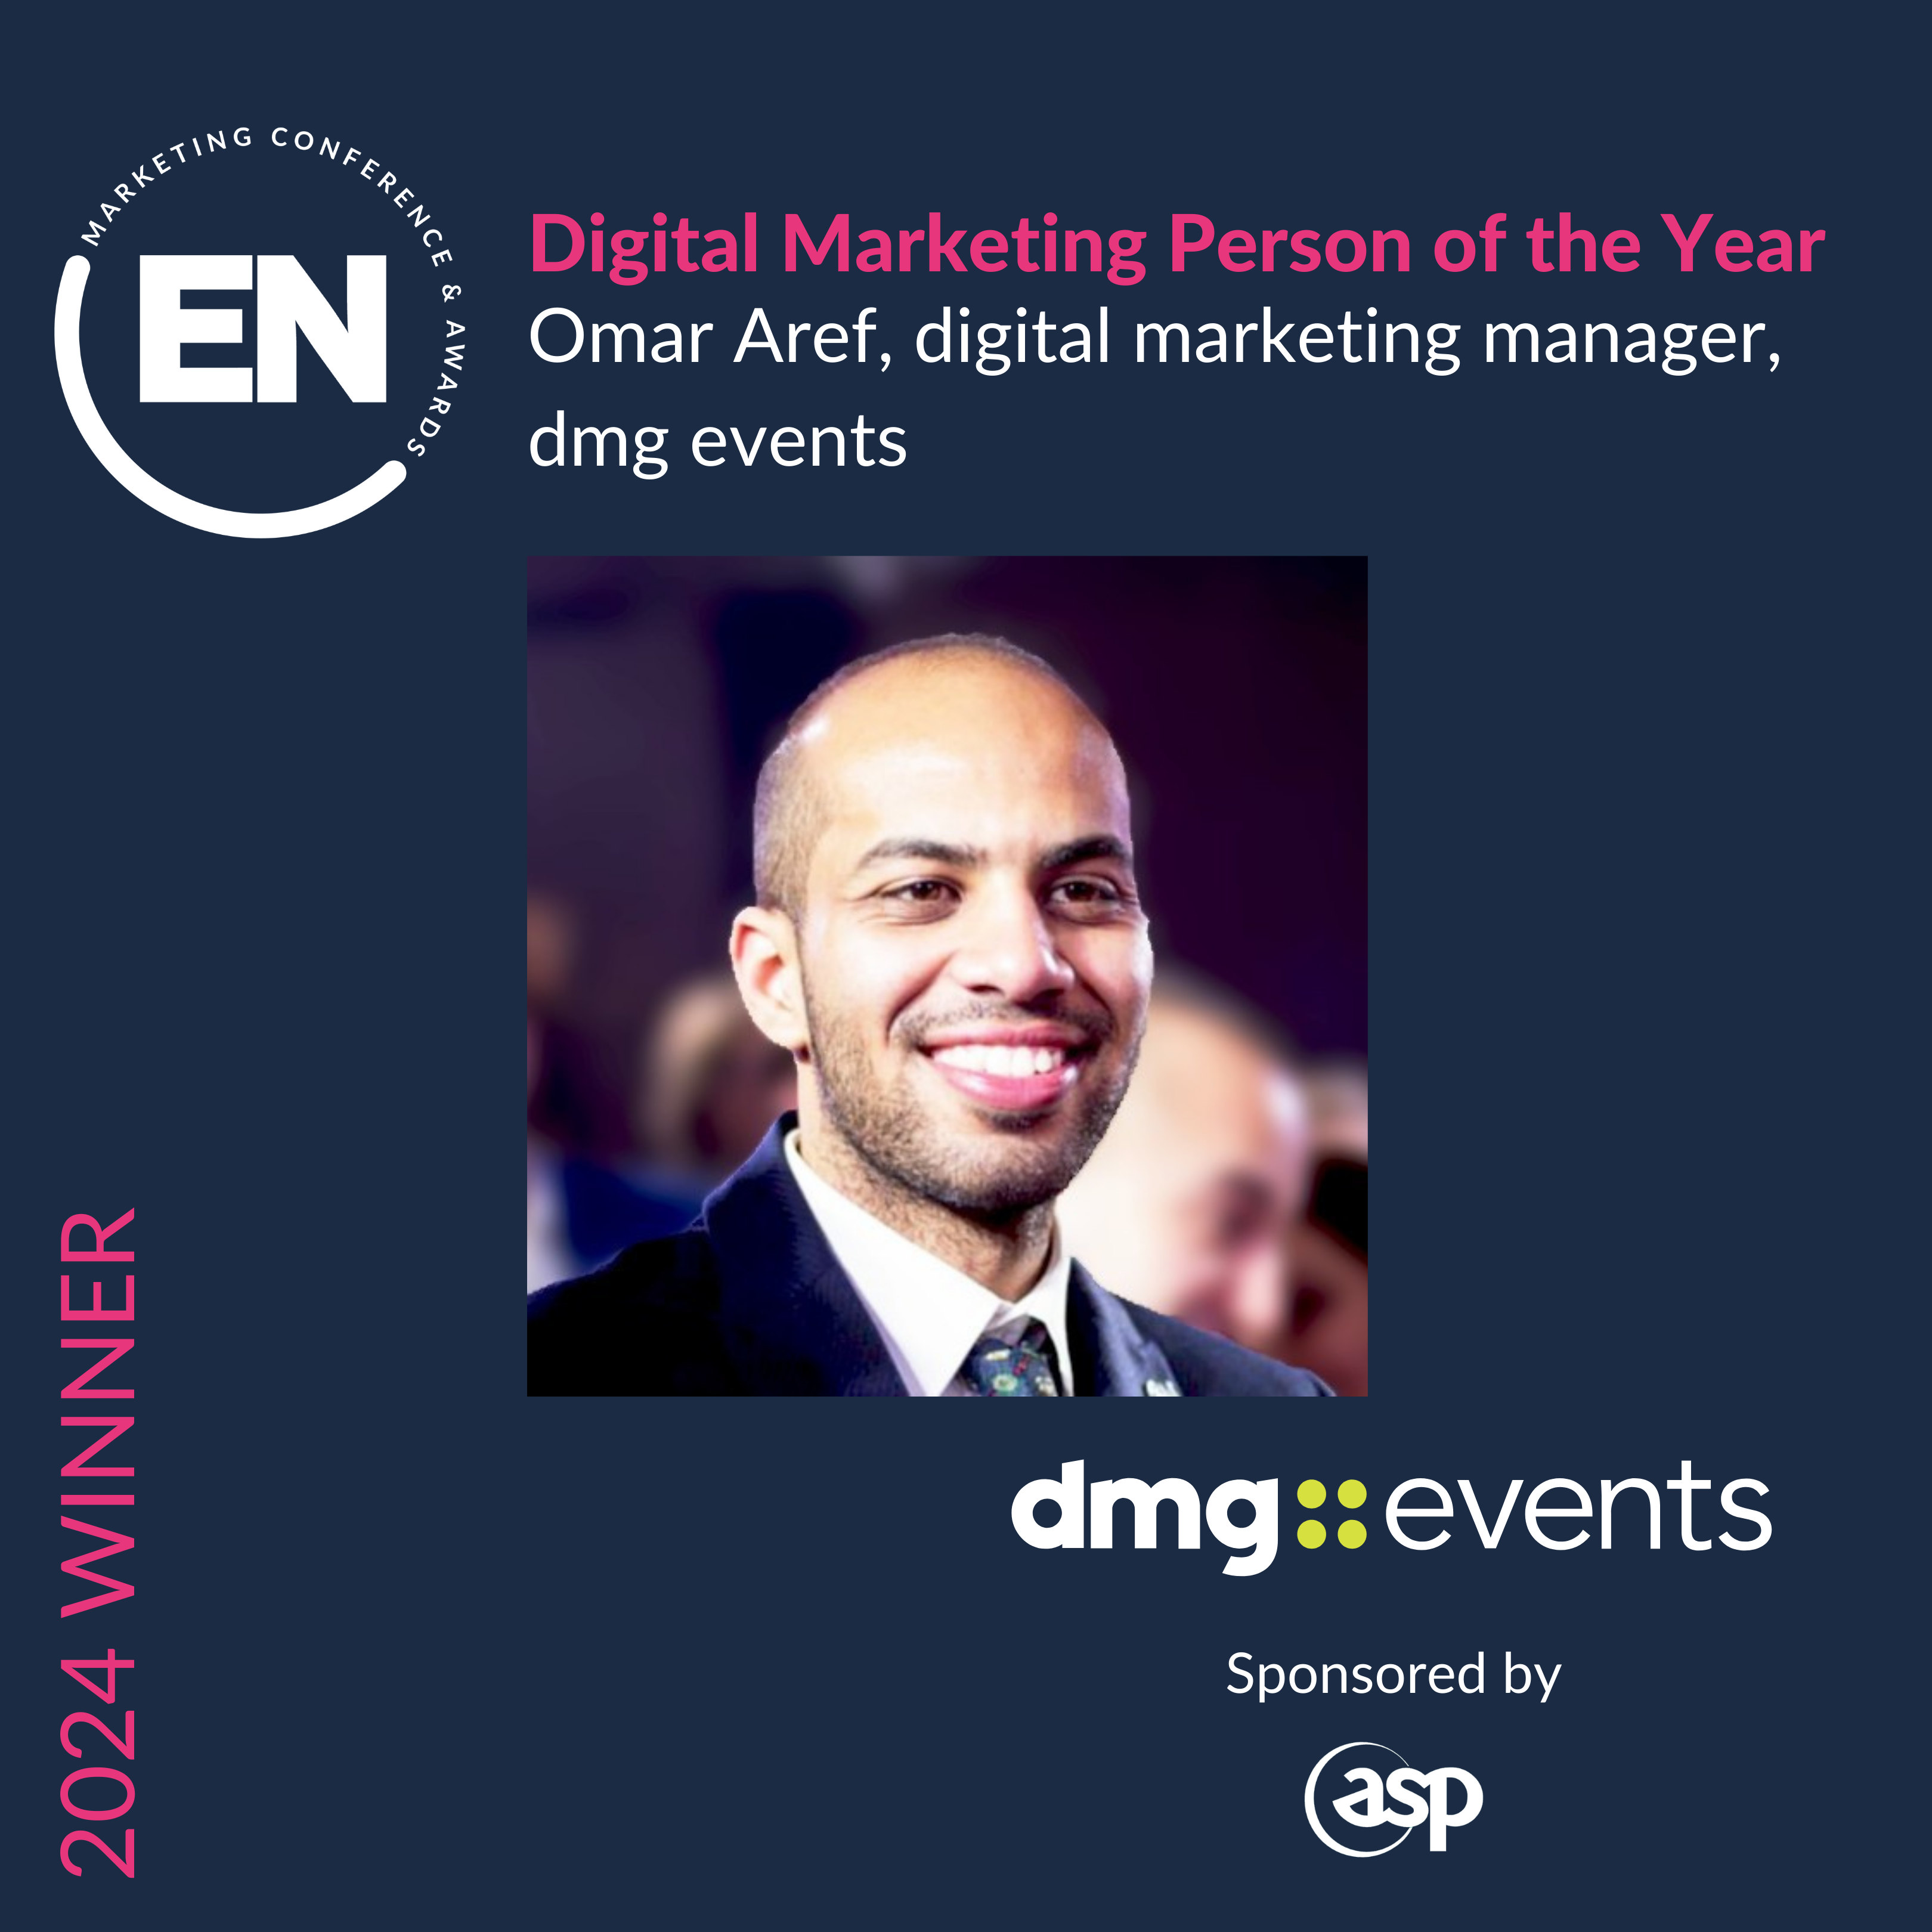 Digital Marketing Person of the Year Sponsored by ASP